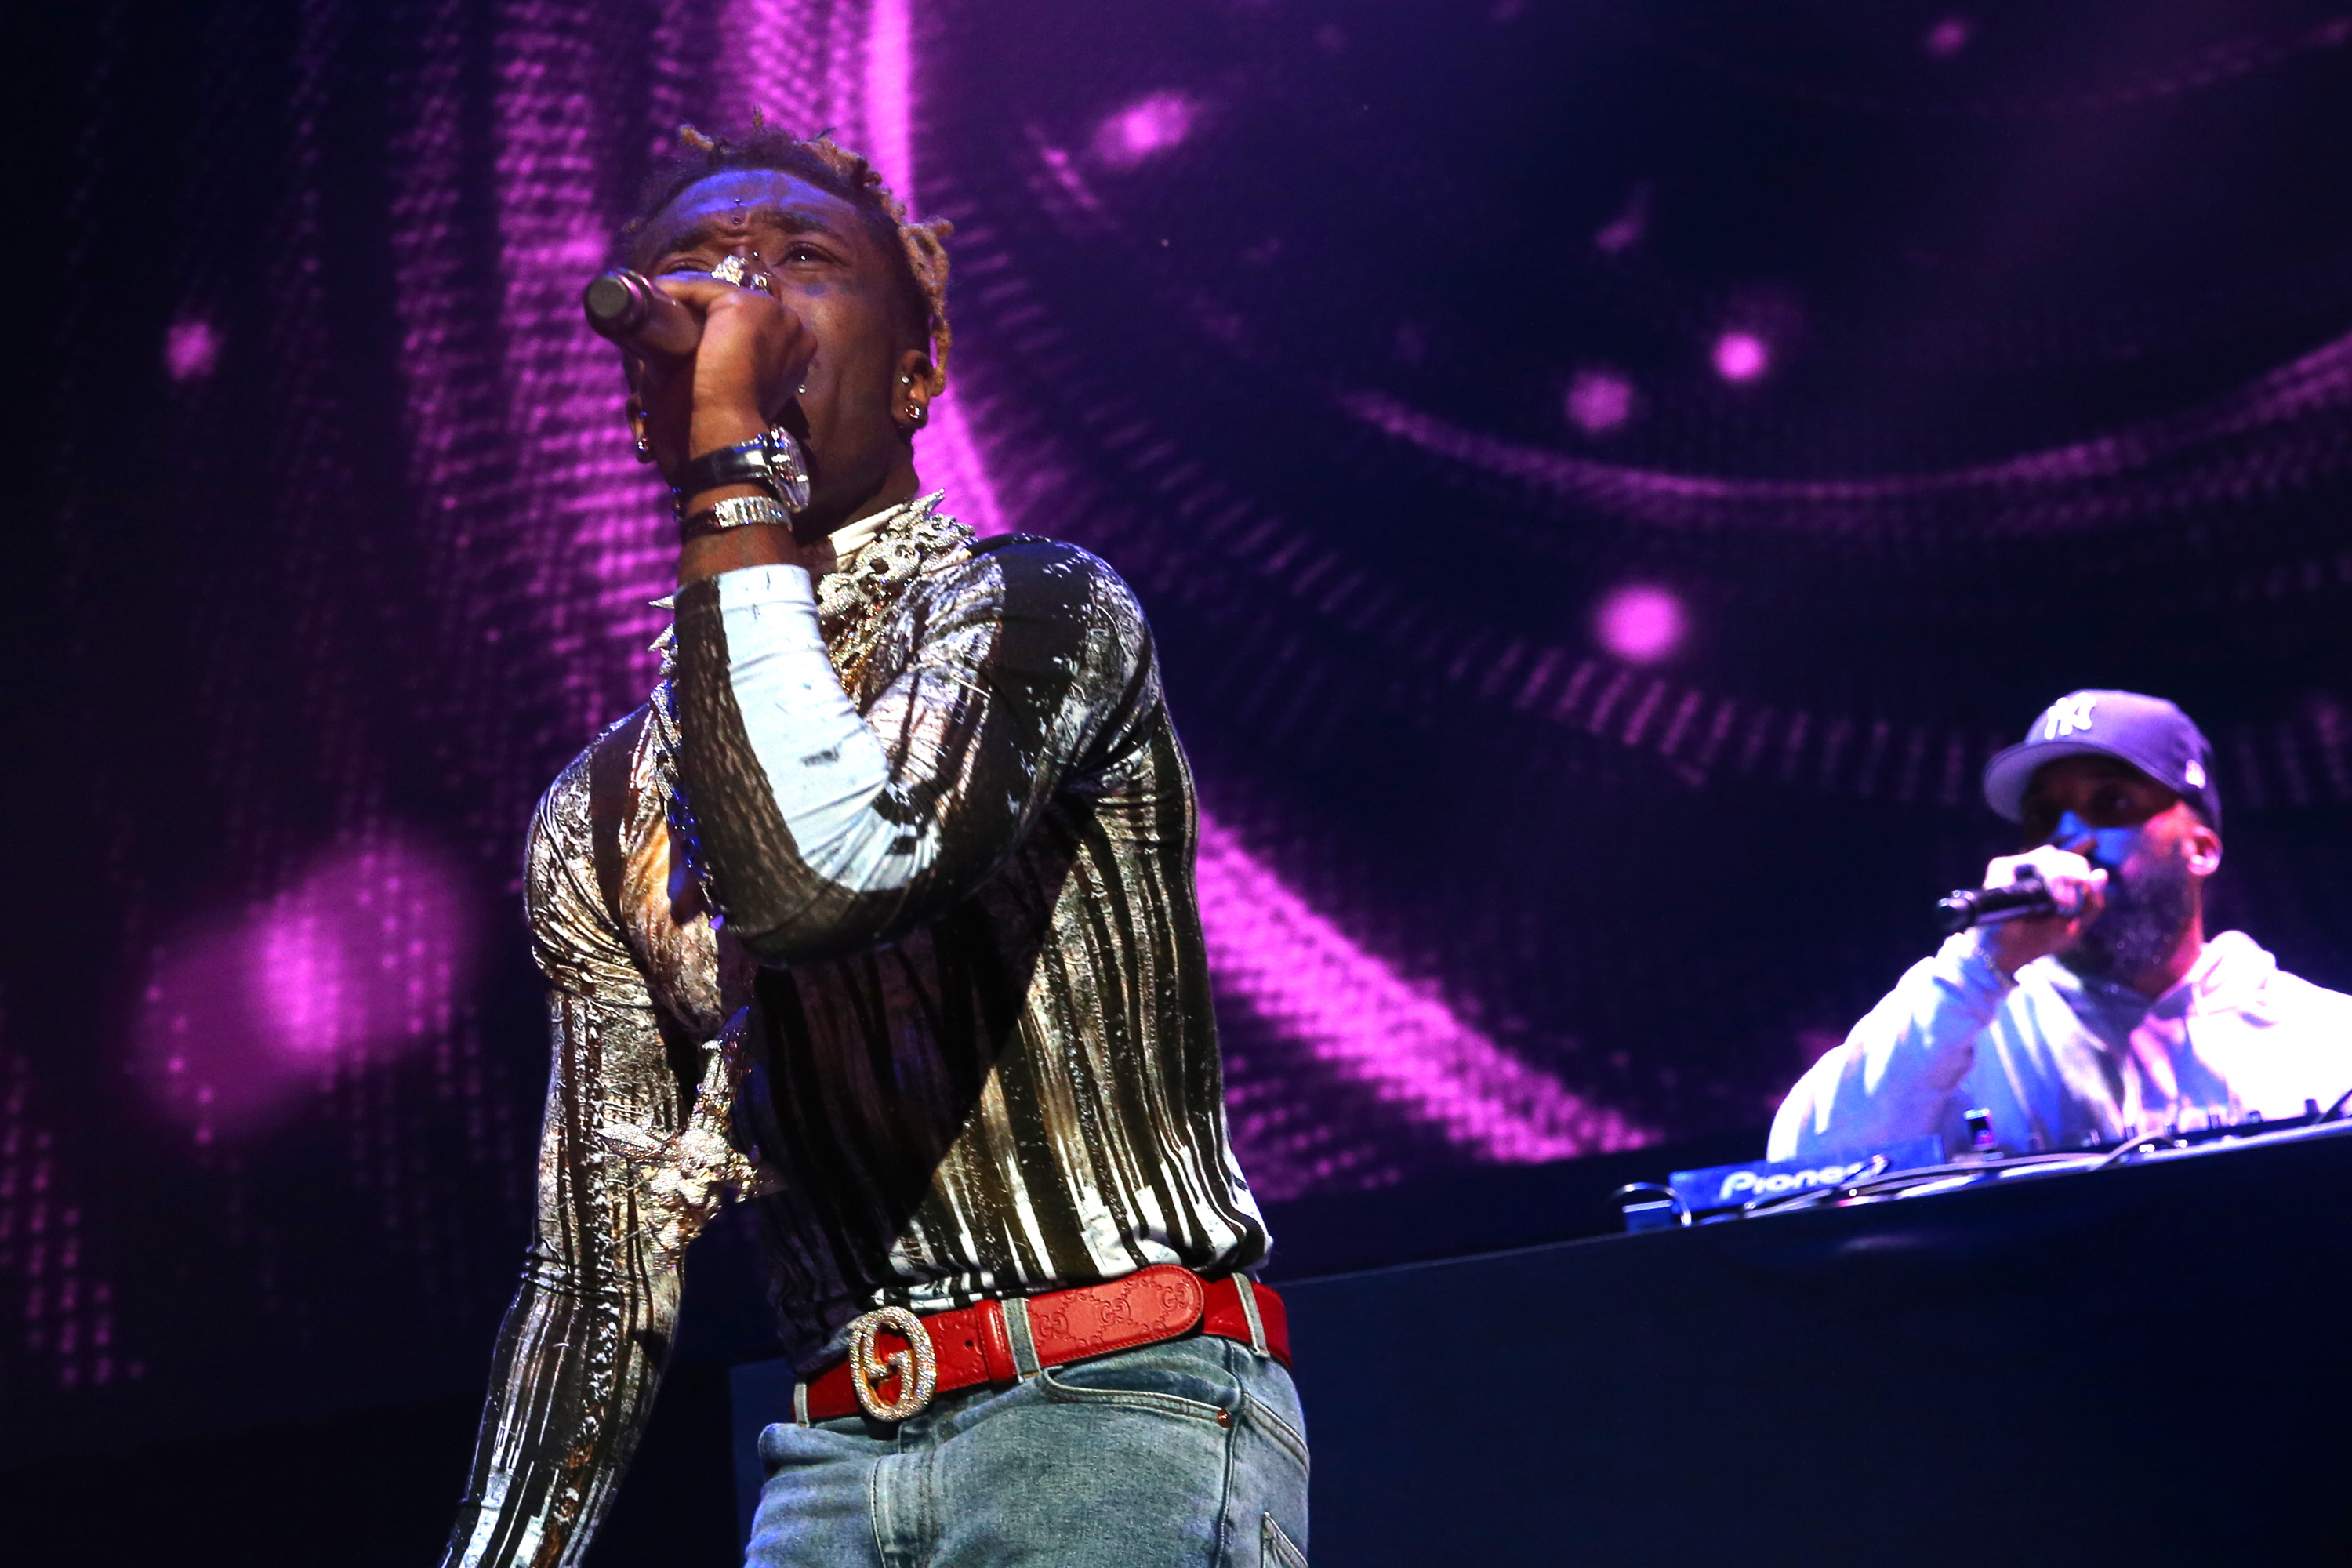 Lil Uzi Vert Ordered To Pay $30K After Skipping Show: Report